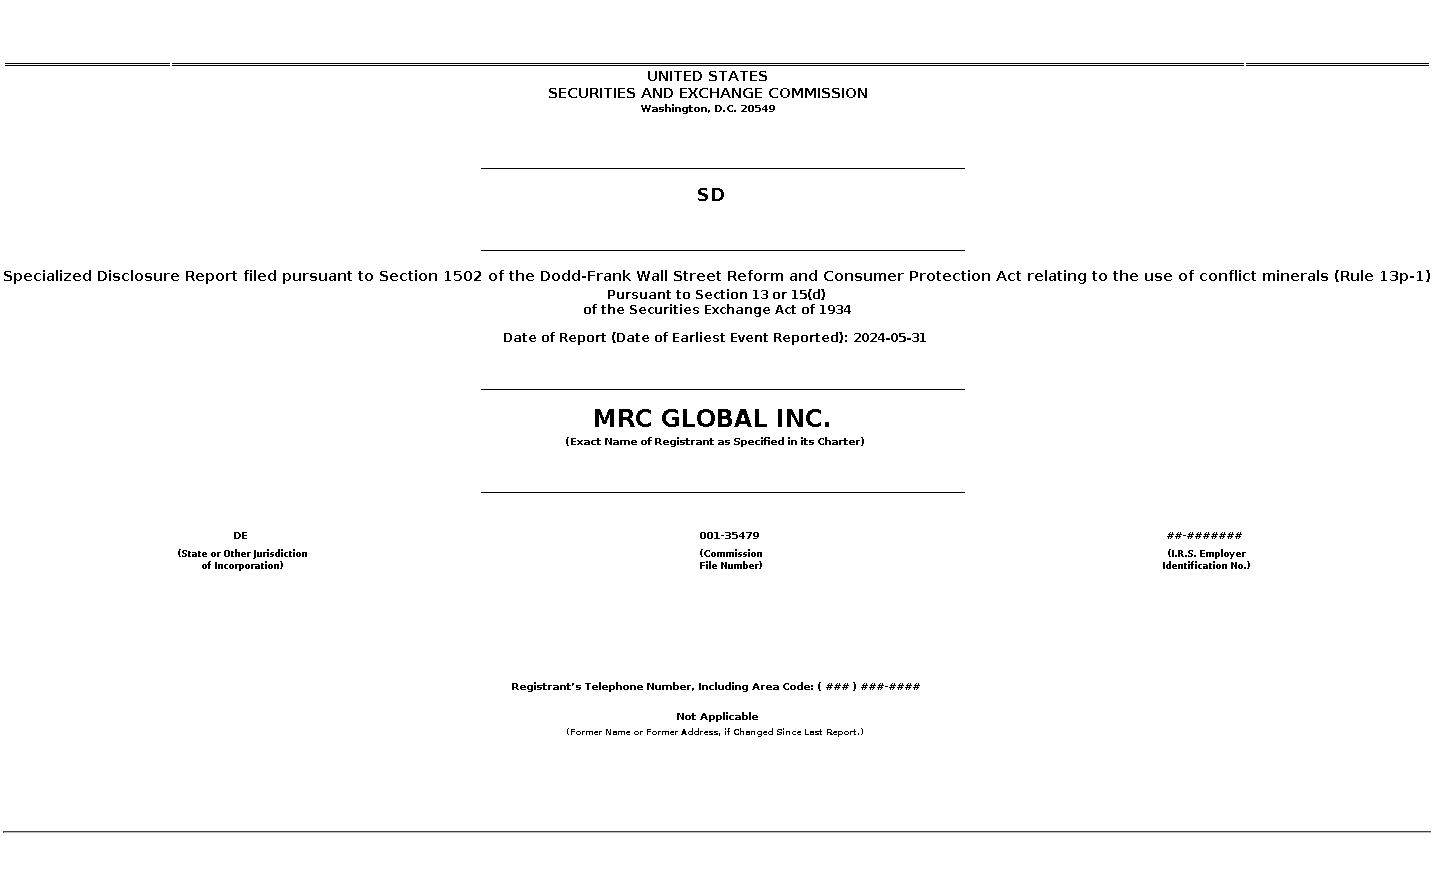 MRC : SD Specialized Disclosure Report filed pursuant to Section 1502 of the Dodd-Frank Wall Street Reform and Consumer Protection Act relating to the use of conflict minerals (Rule 13p-1)